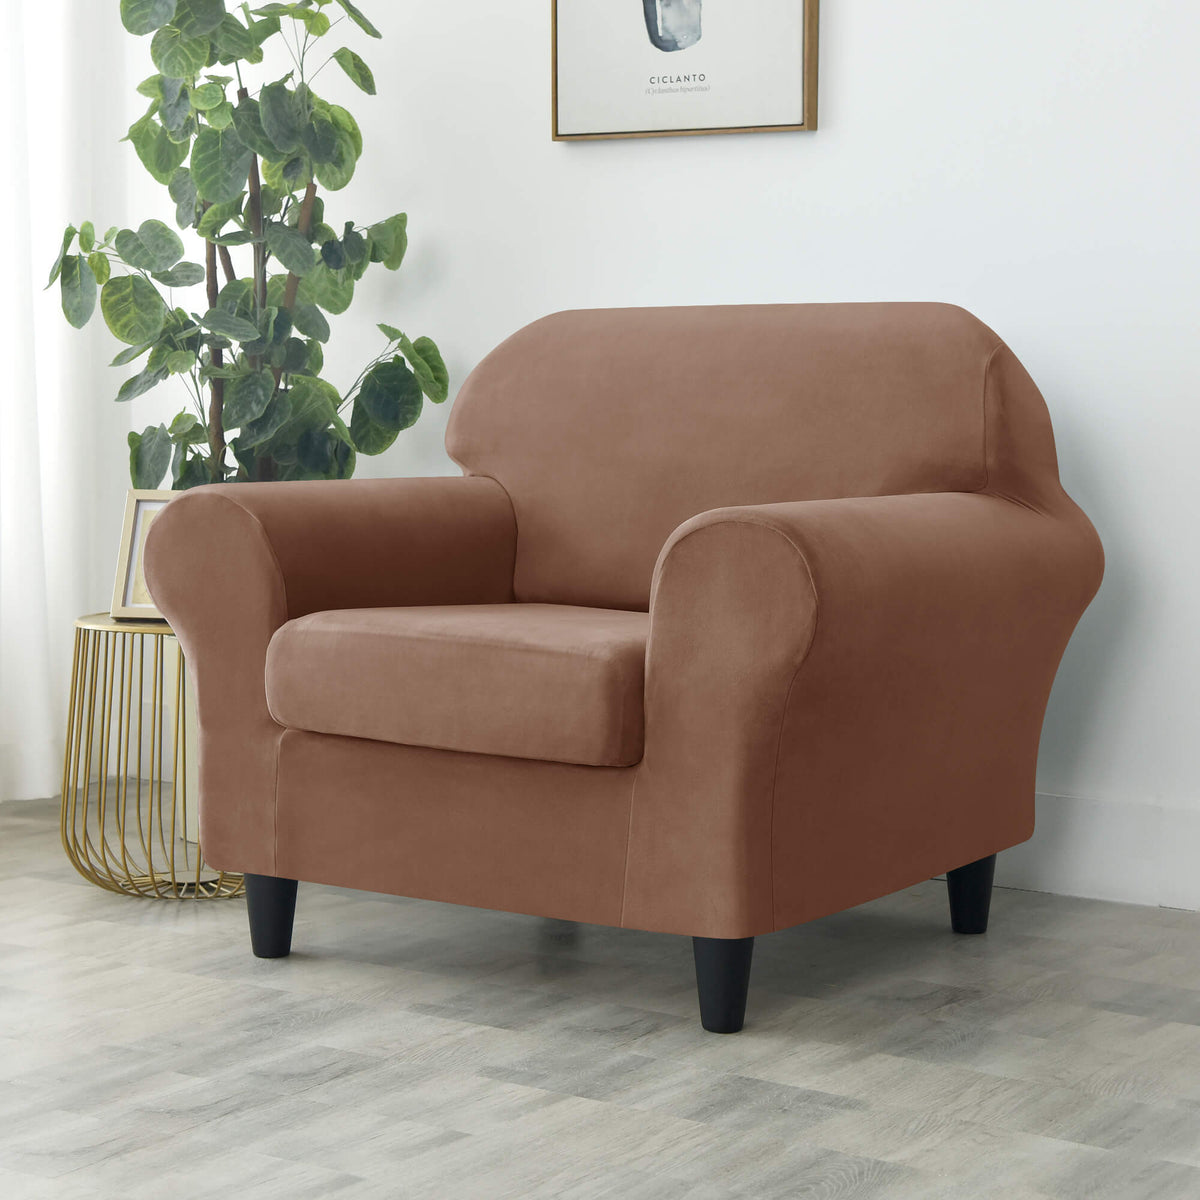 Crfatop Modern Couch Cover Stretch Armchair Sofa Seat Slipcovers with Elastic Bottom ArmchairBrown